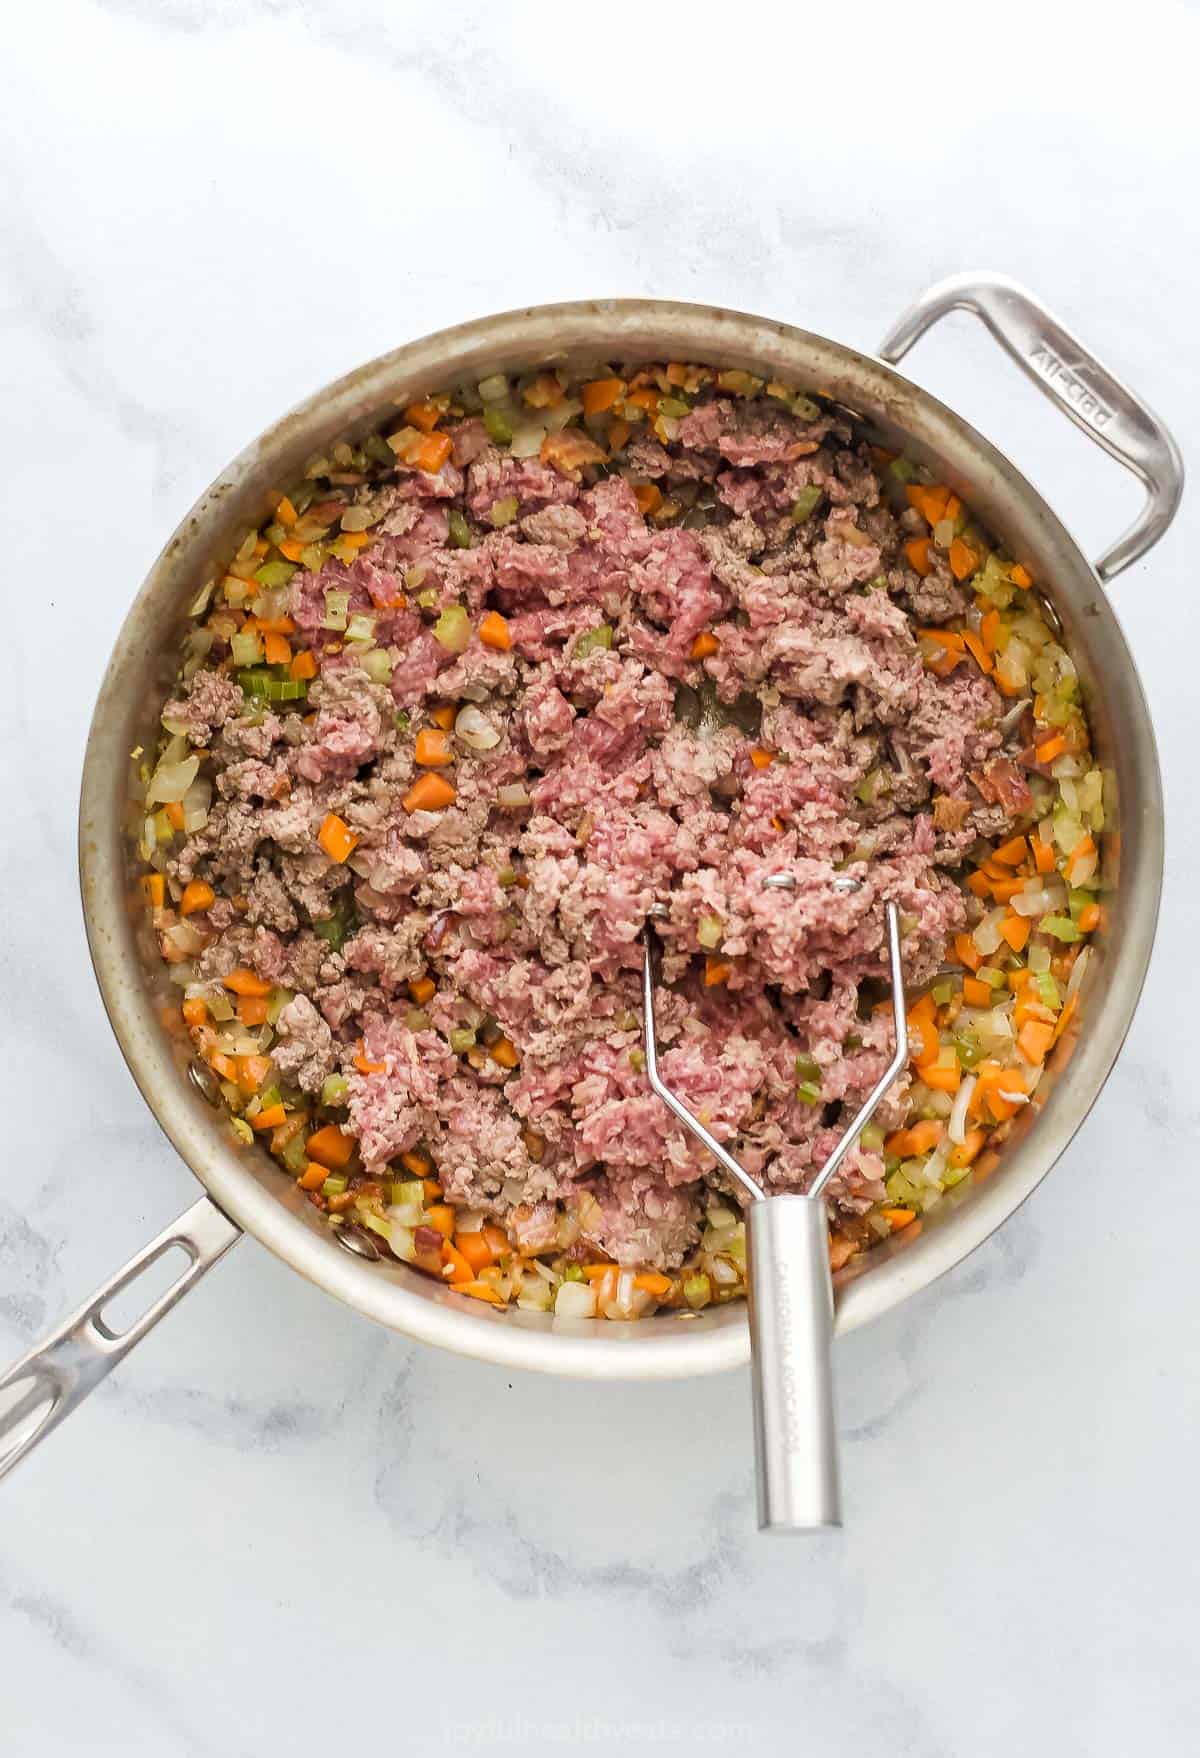 Saute pan with ground beef being mashed up and mixed with cooked vegetables